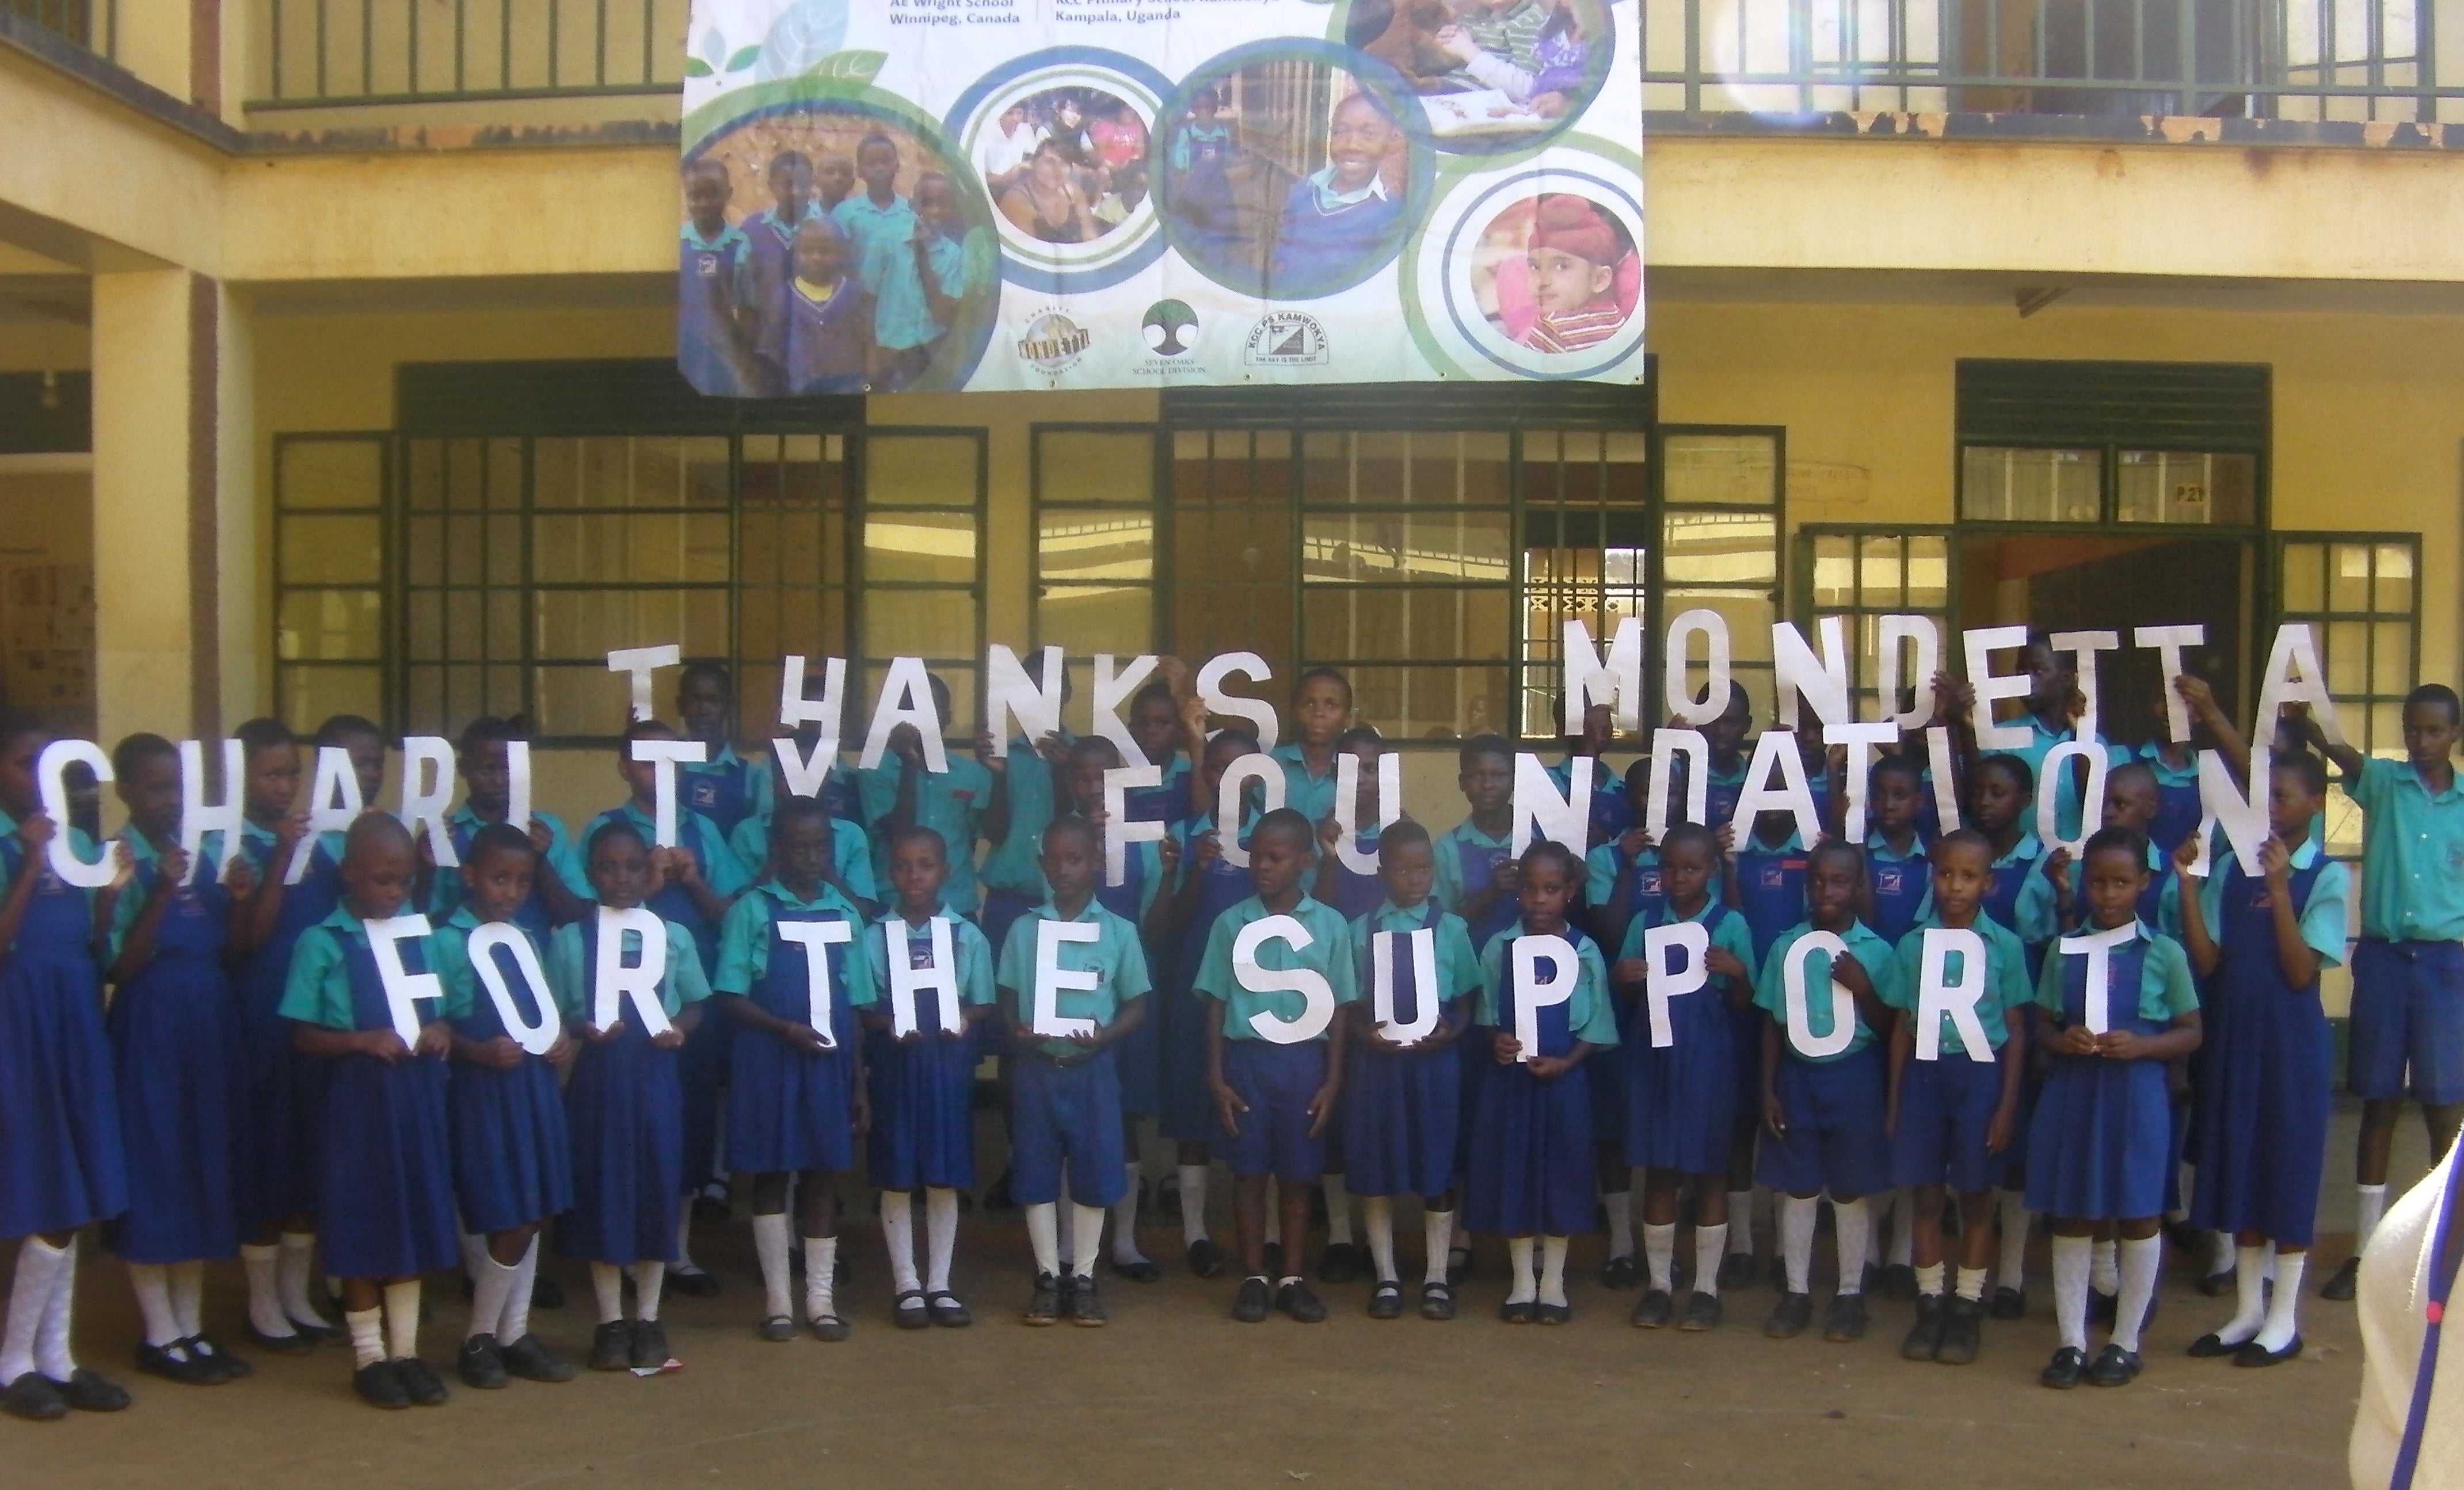 Students holding up a thank you message banner to Mondetta Charity Foundation